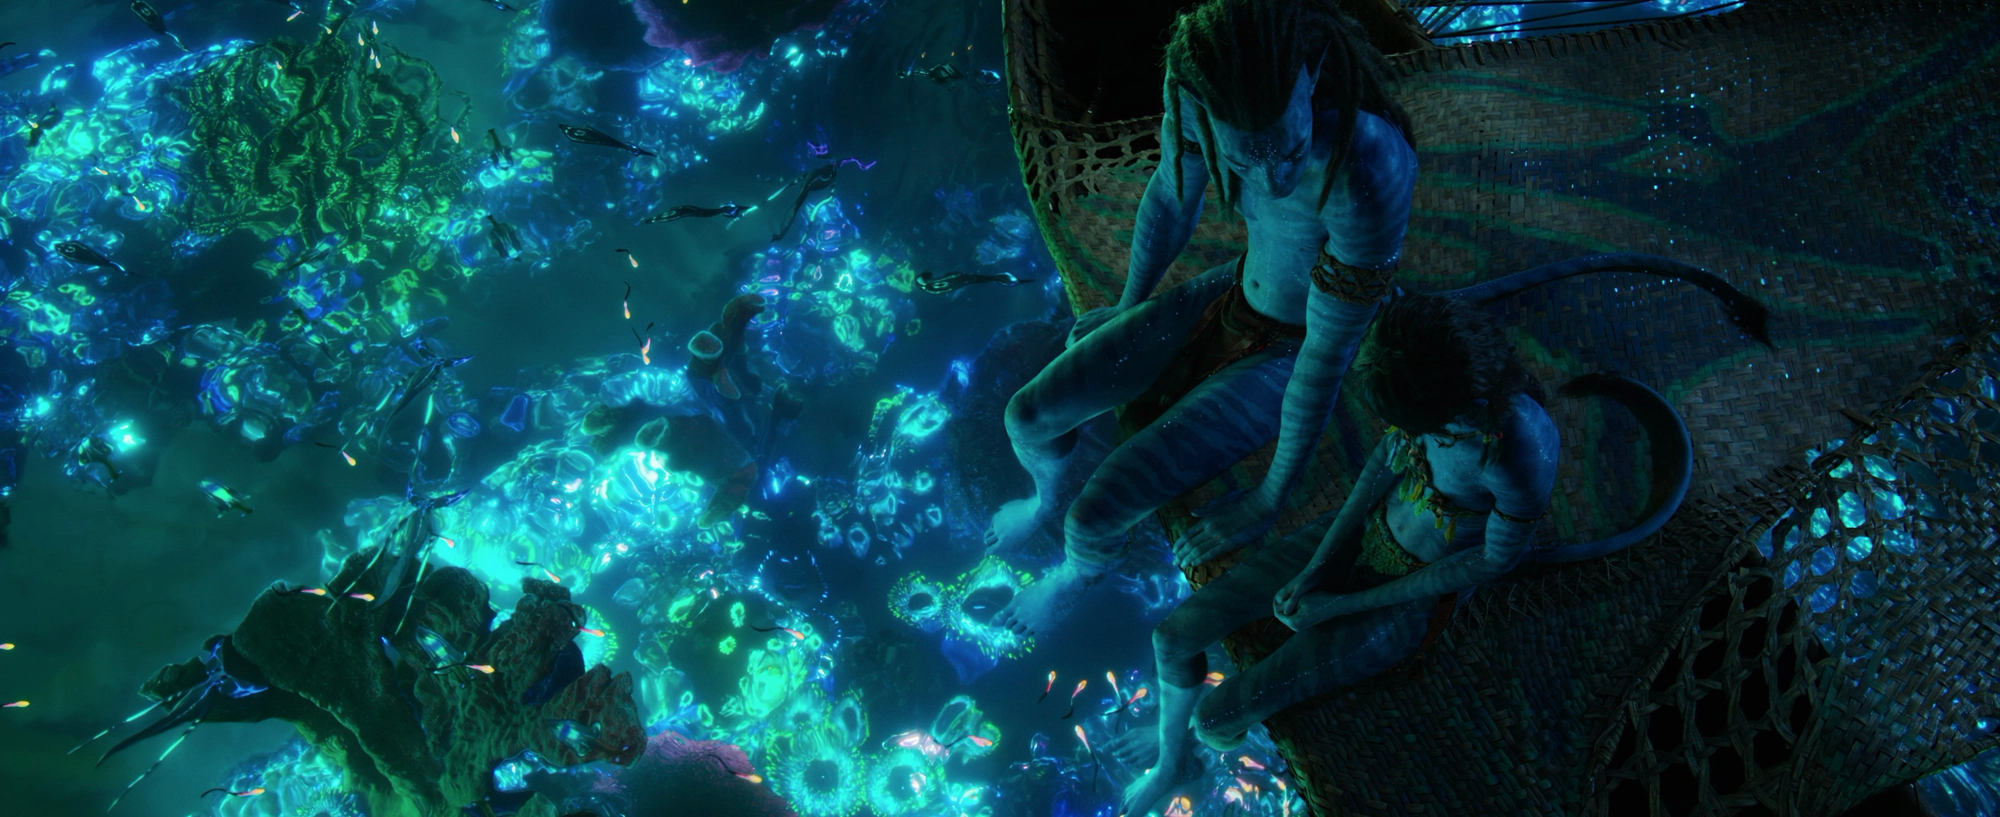 Avatar: The Way Of Water is truly a wonder of the world, not just a movie - Photo 11.